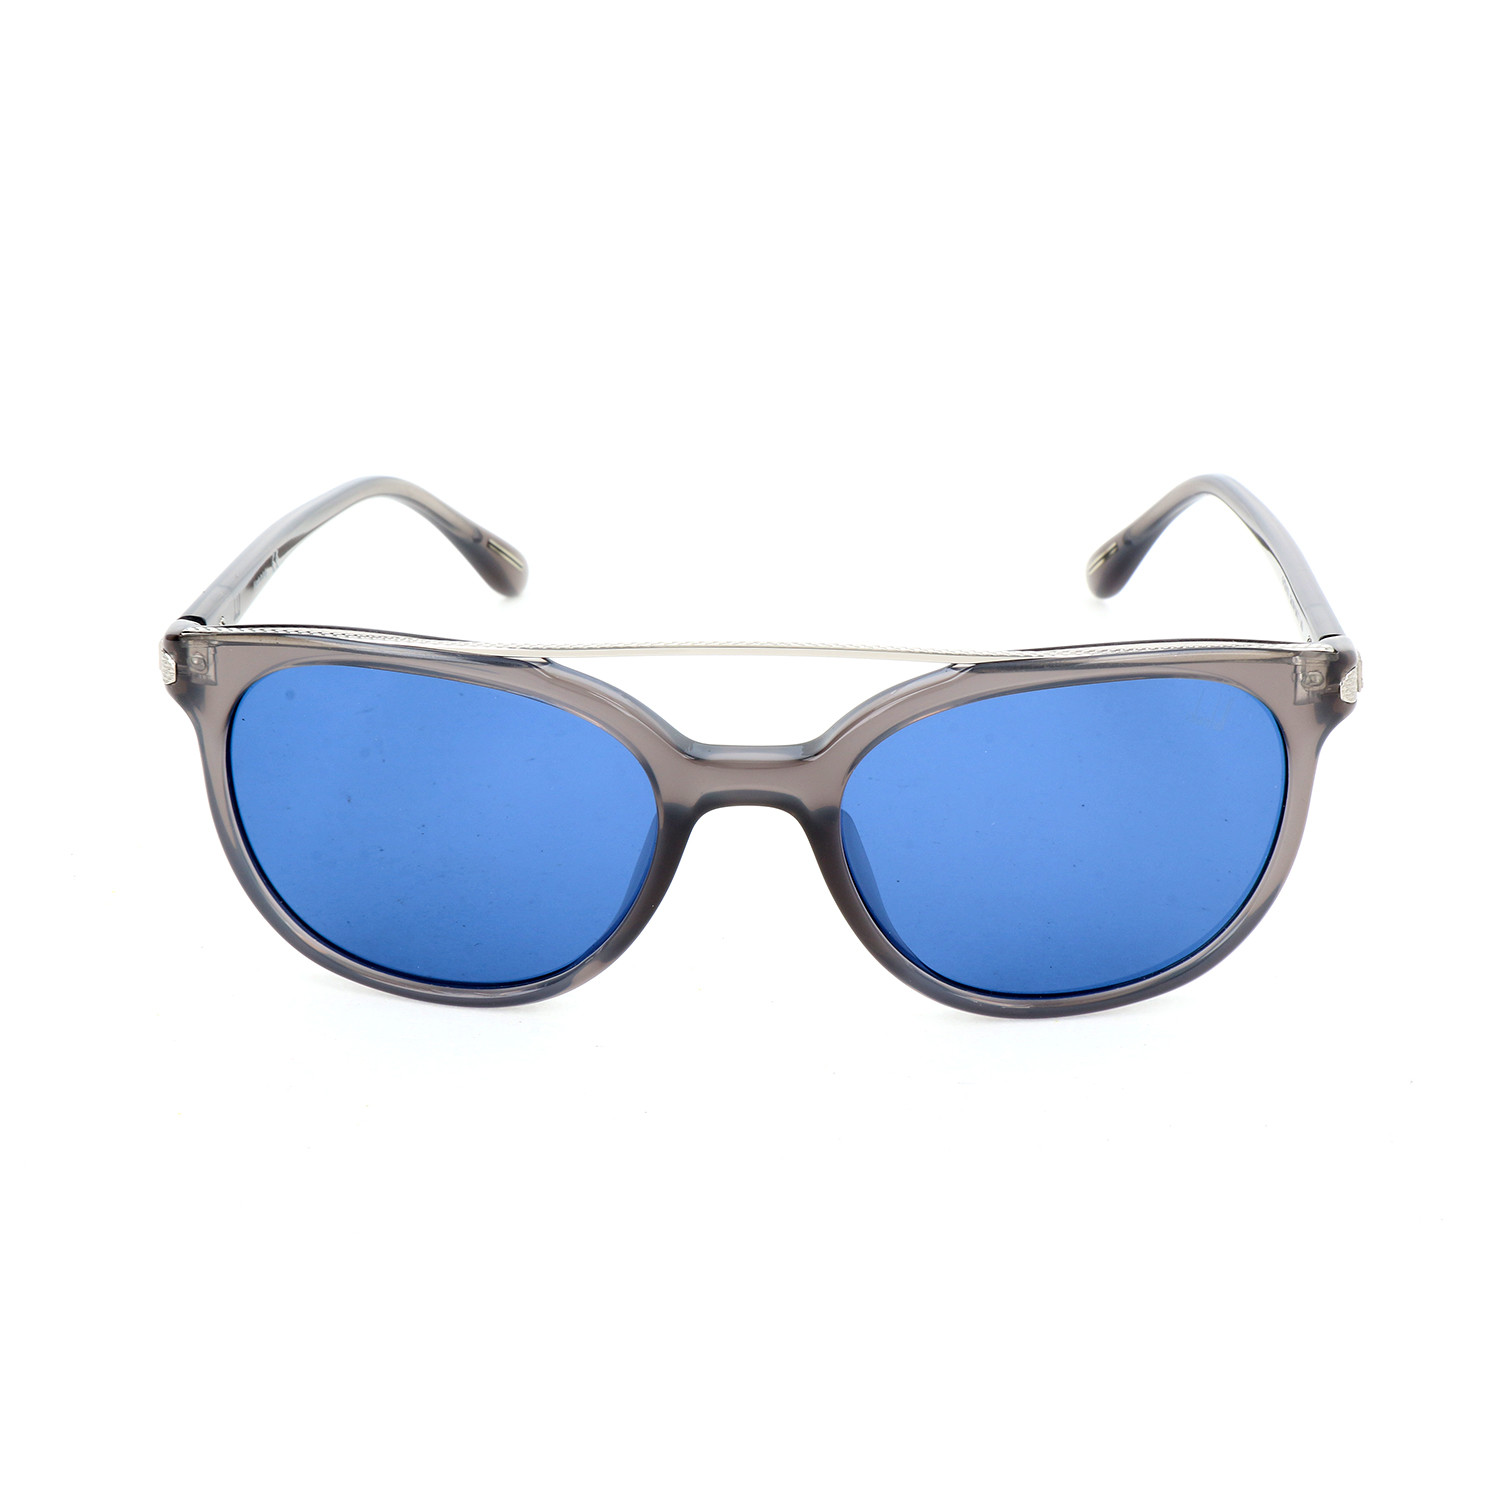 Men's SDH011 Sunglasses // Shiny Opaline Gray - dunhill - Touch of Modern